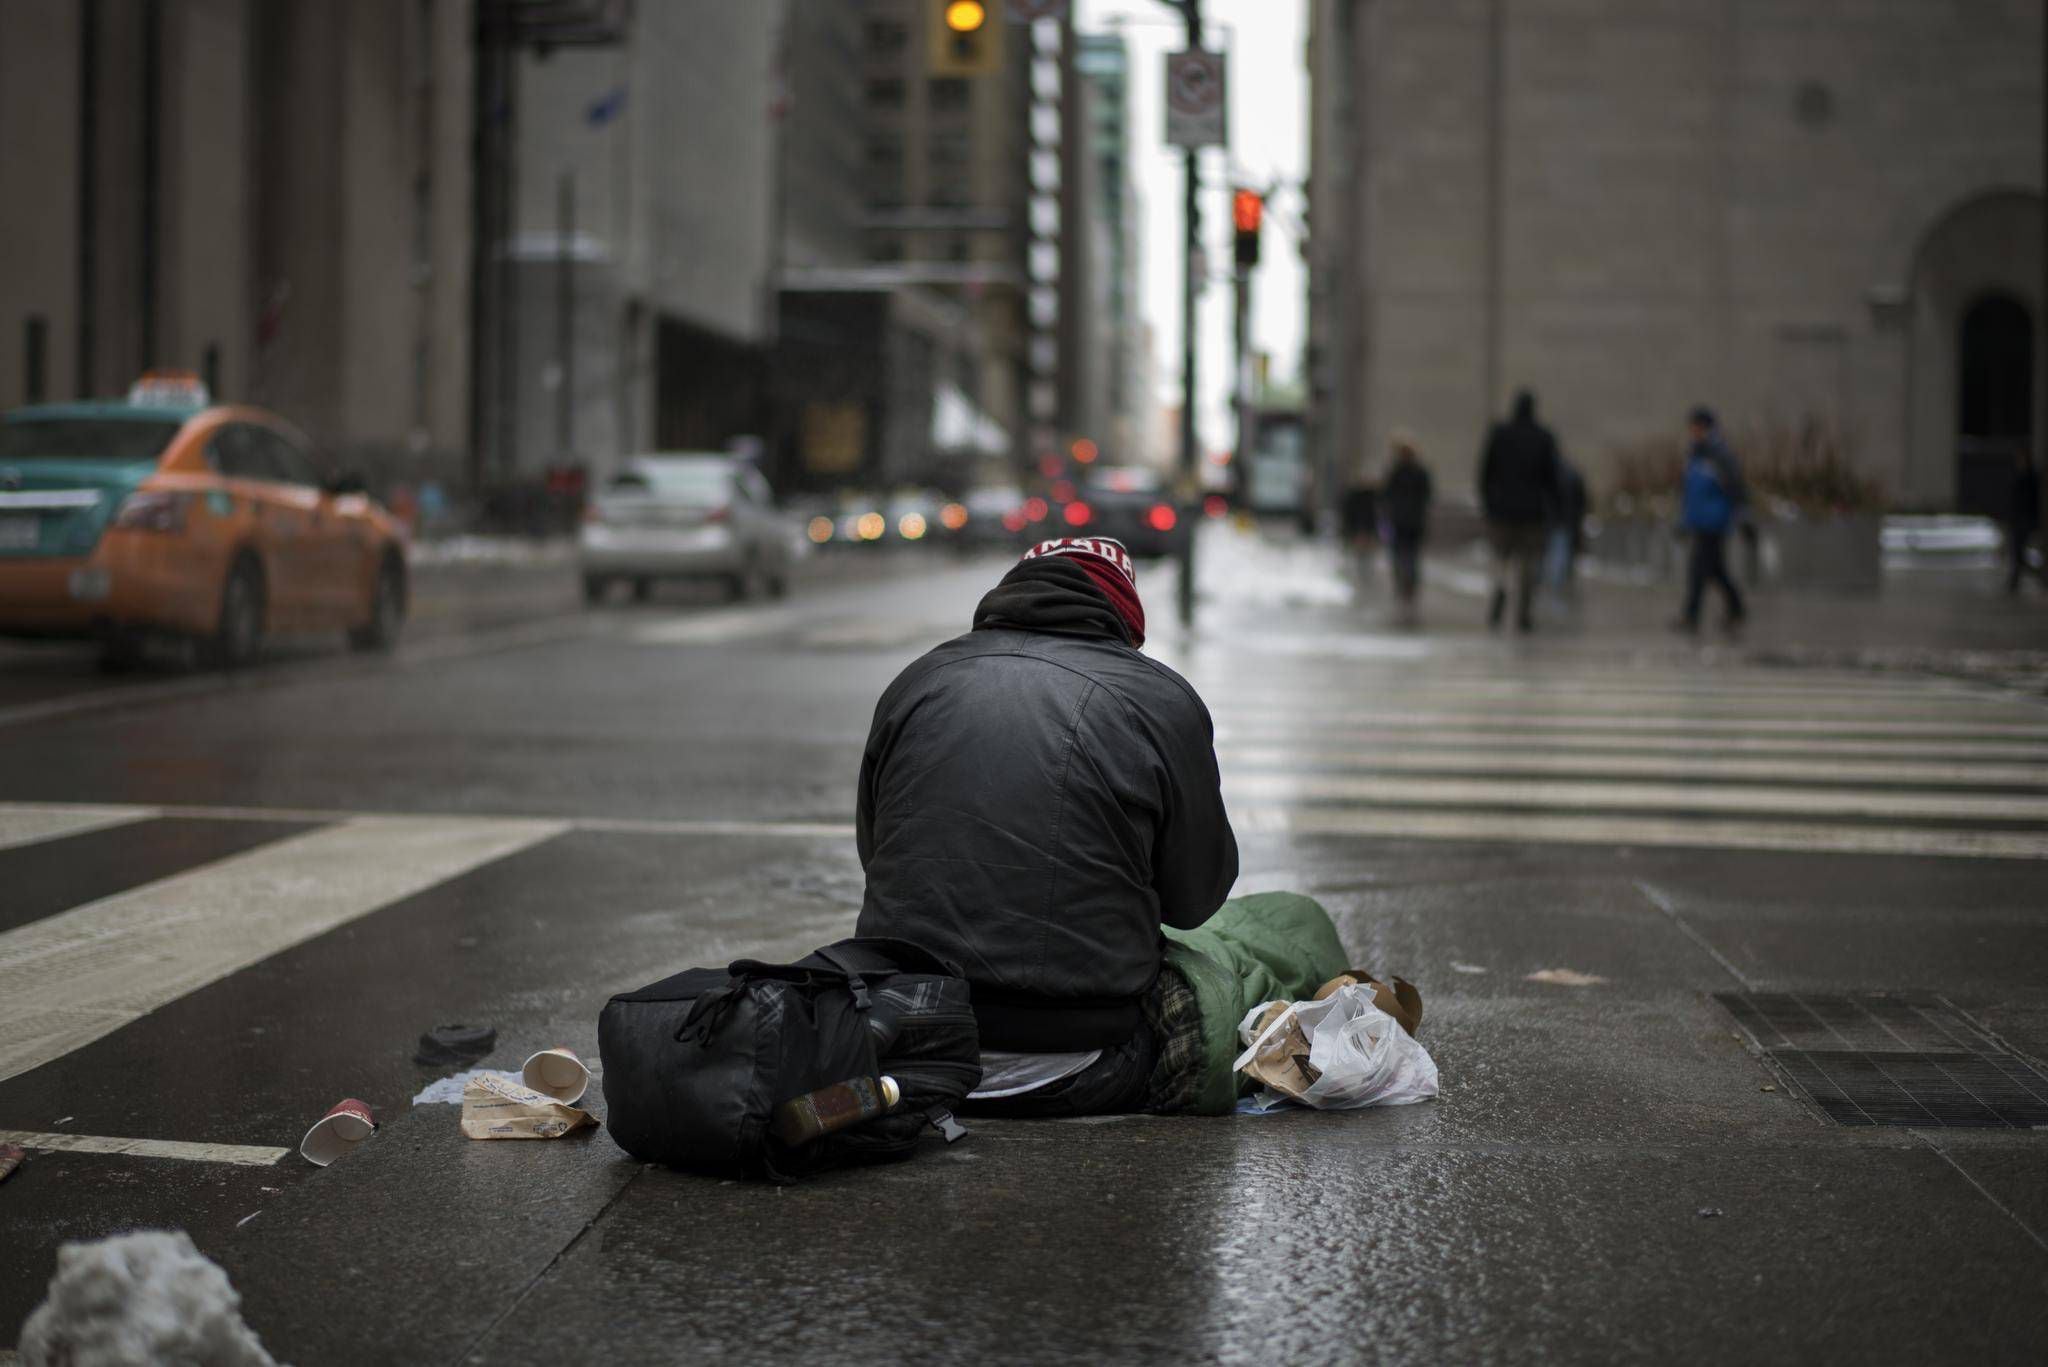 Comprehensive statistics lacking on number of homeless people in Canada - The Globe and Mail